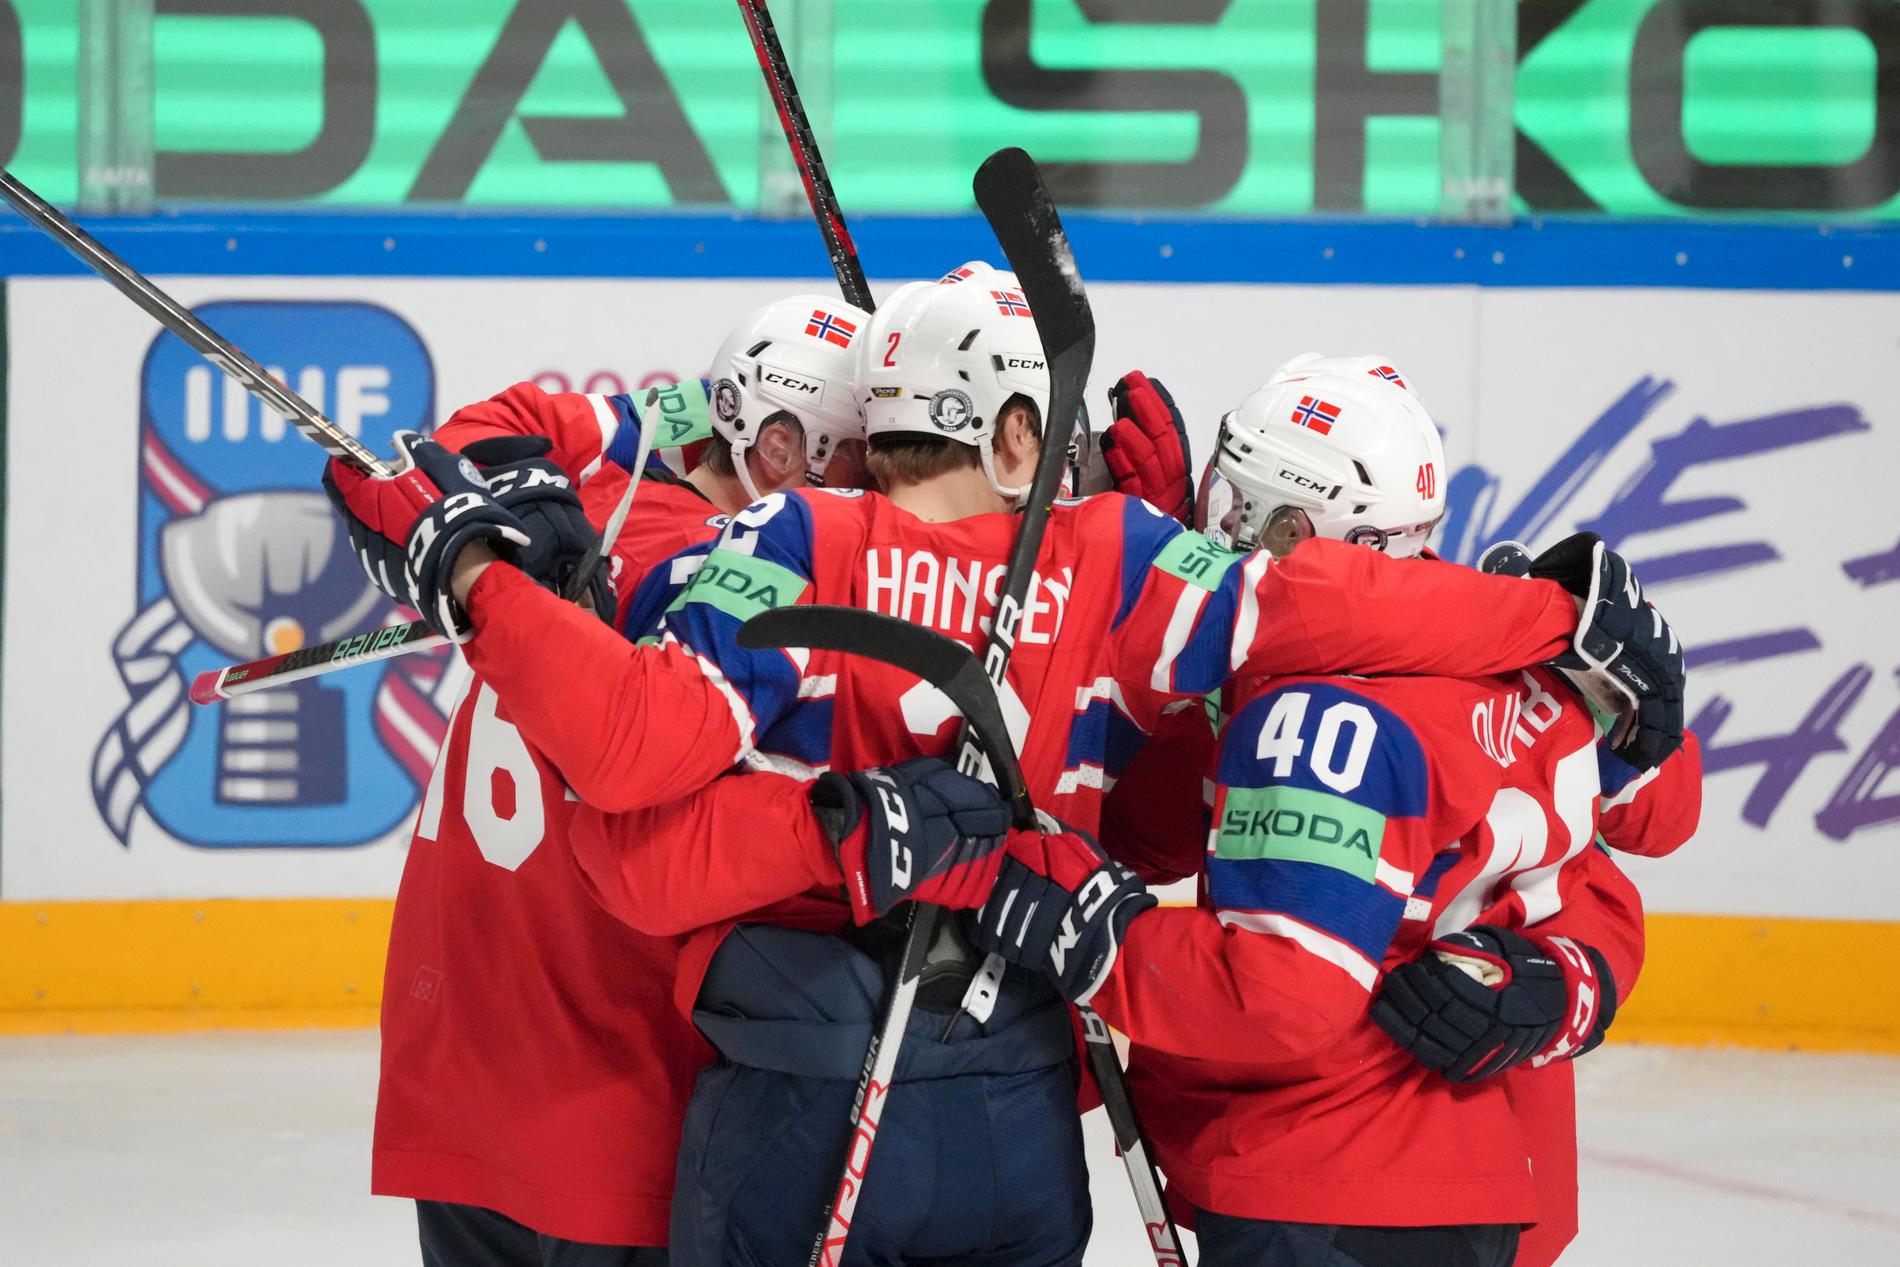 Post: The Norwegian national ice hockey team beat Canada in the World Cup earlier this year.  The same national team was suspended for the rest of the year due to the federation's deficit.